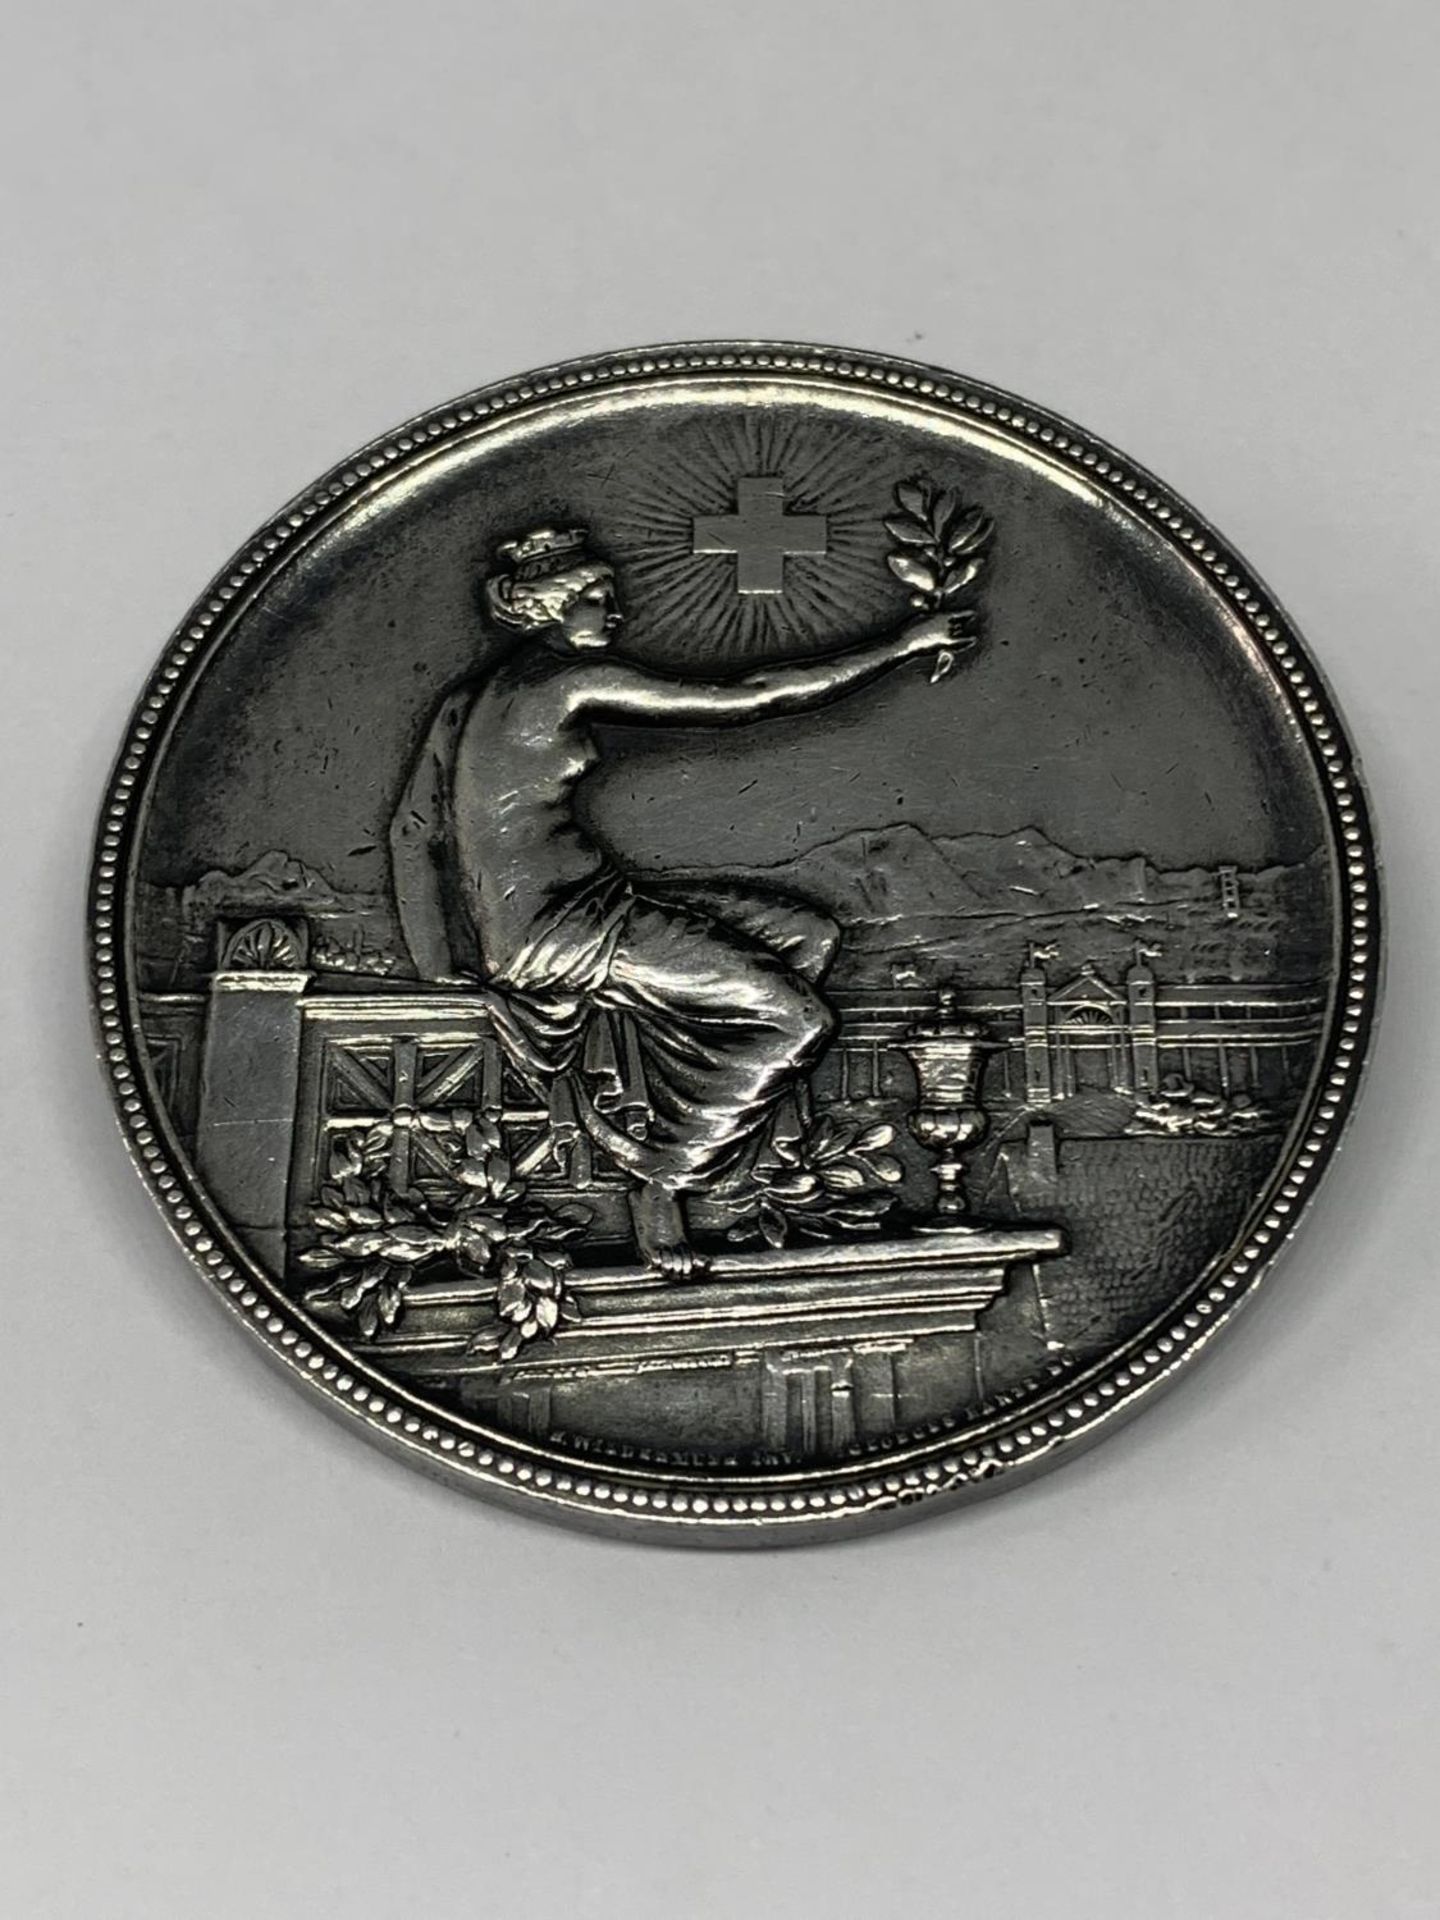 A SILVER SWISS 1895 SHOOTING MEDAL IN THE FORM OF A BROOCH